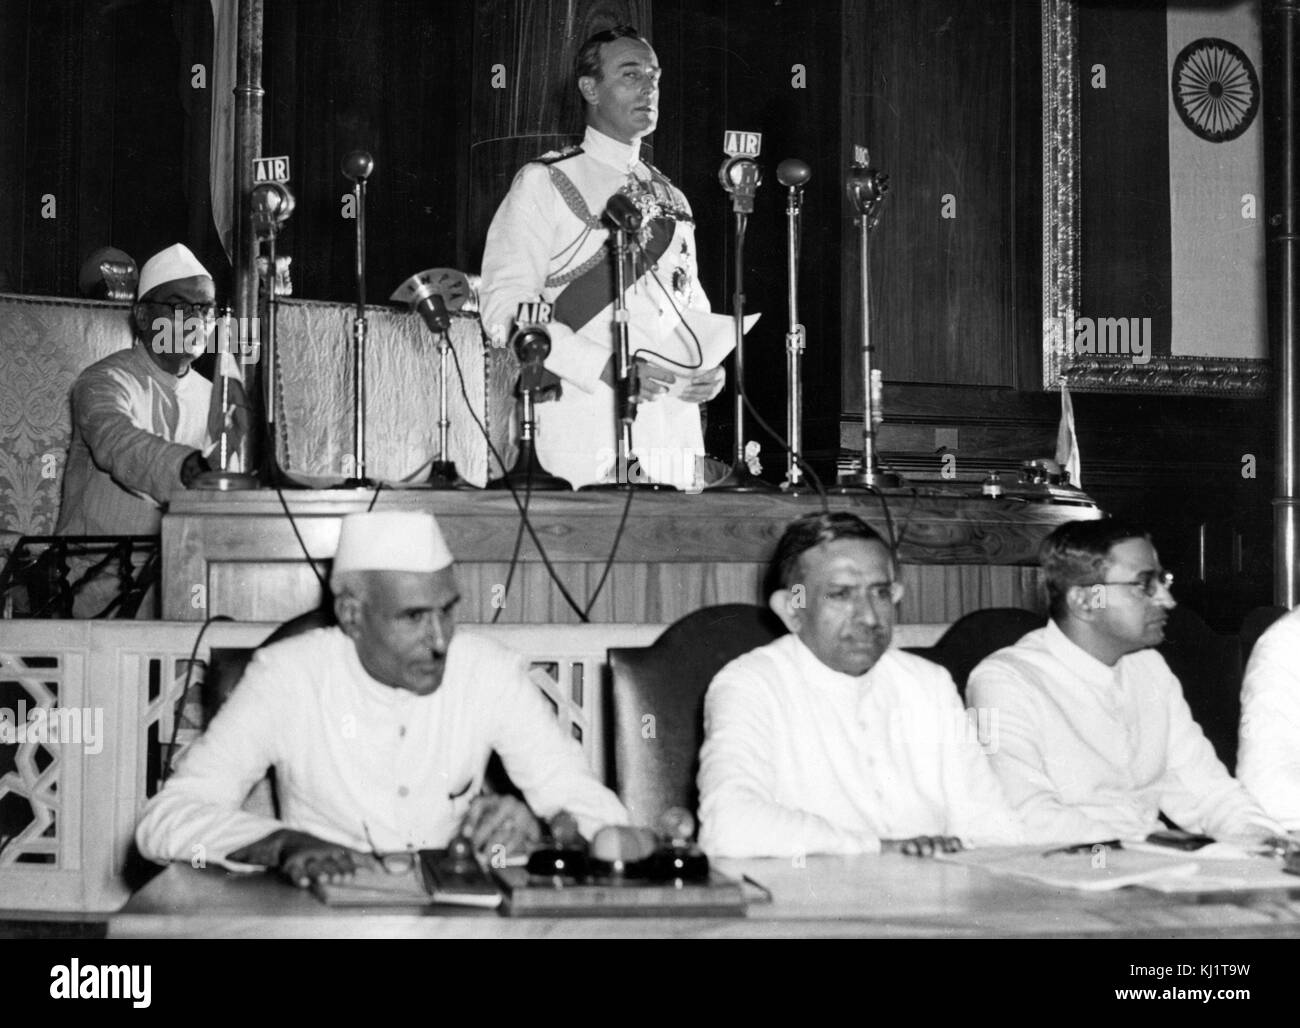 Nehru listens as the Viceroy of India, Lord Mountbatten; declares India's Independence 1947. Jawaharlal Nehru (1889 –1964) first Prime Minister of India and a central figure in Indian politics before and after independence. leader of the Indian independence movement under the tutelage of Mahatma Gandhi and ruled India from its establishment as an independent nation in 1947 until his death in 1964. Stock Photo